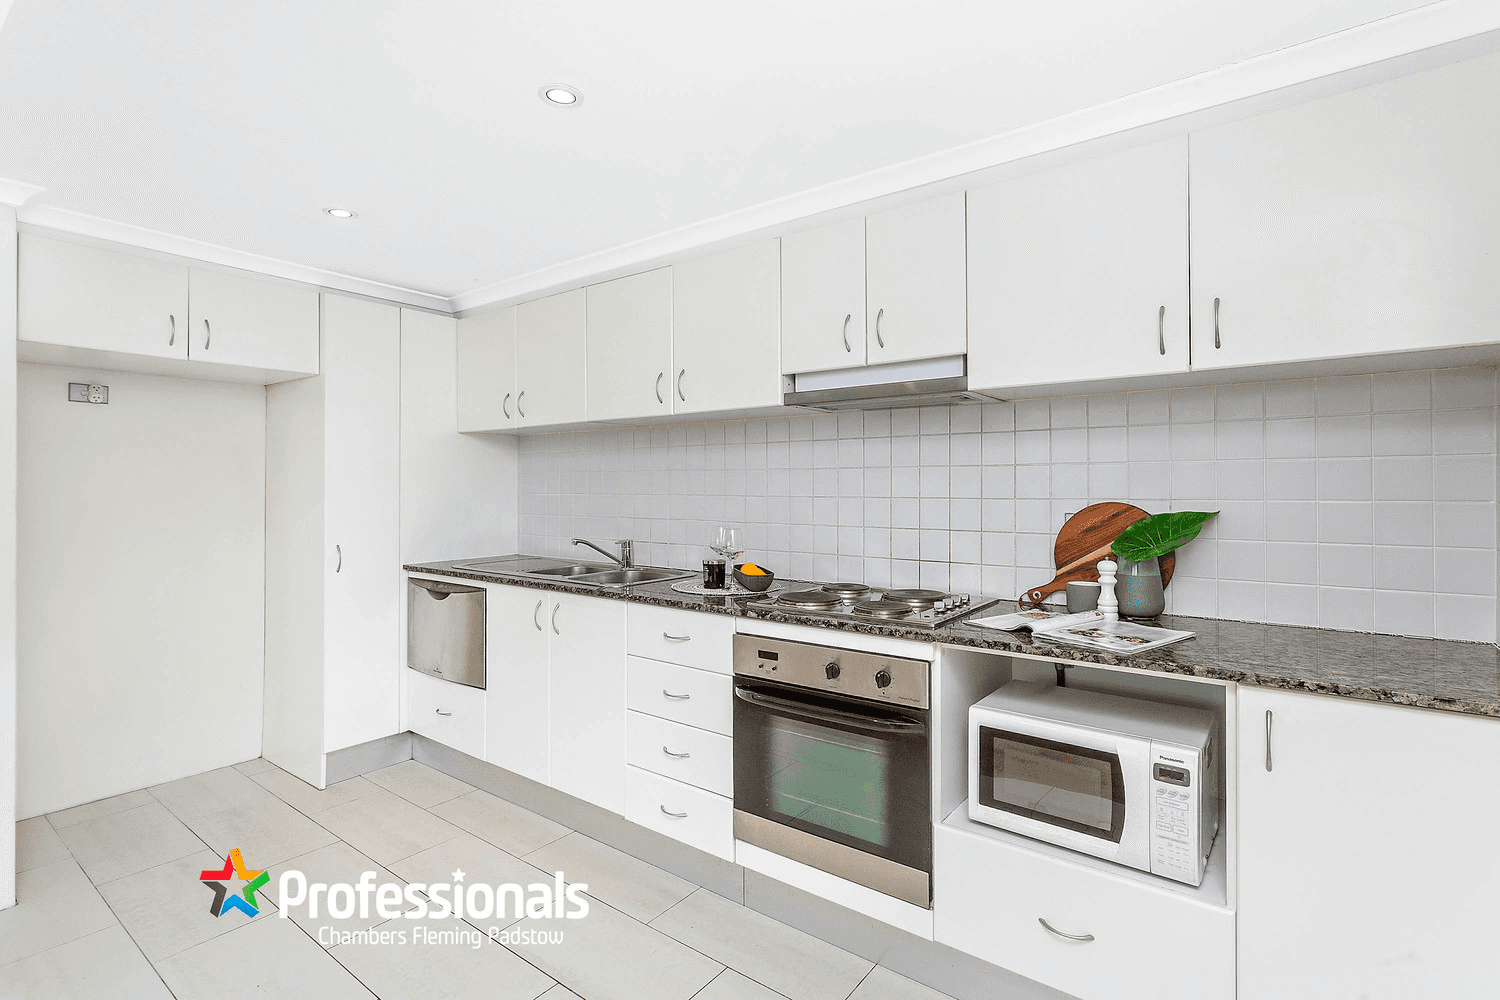 C3/19-29 Marco Avenue, Revesby, NSW 2212